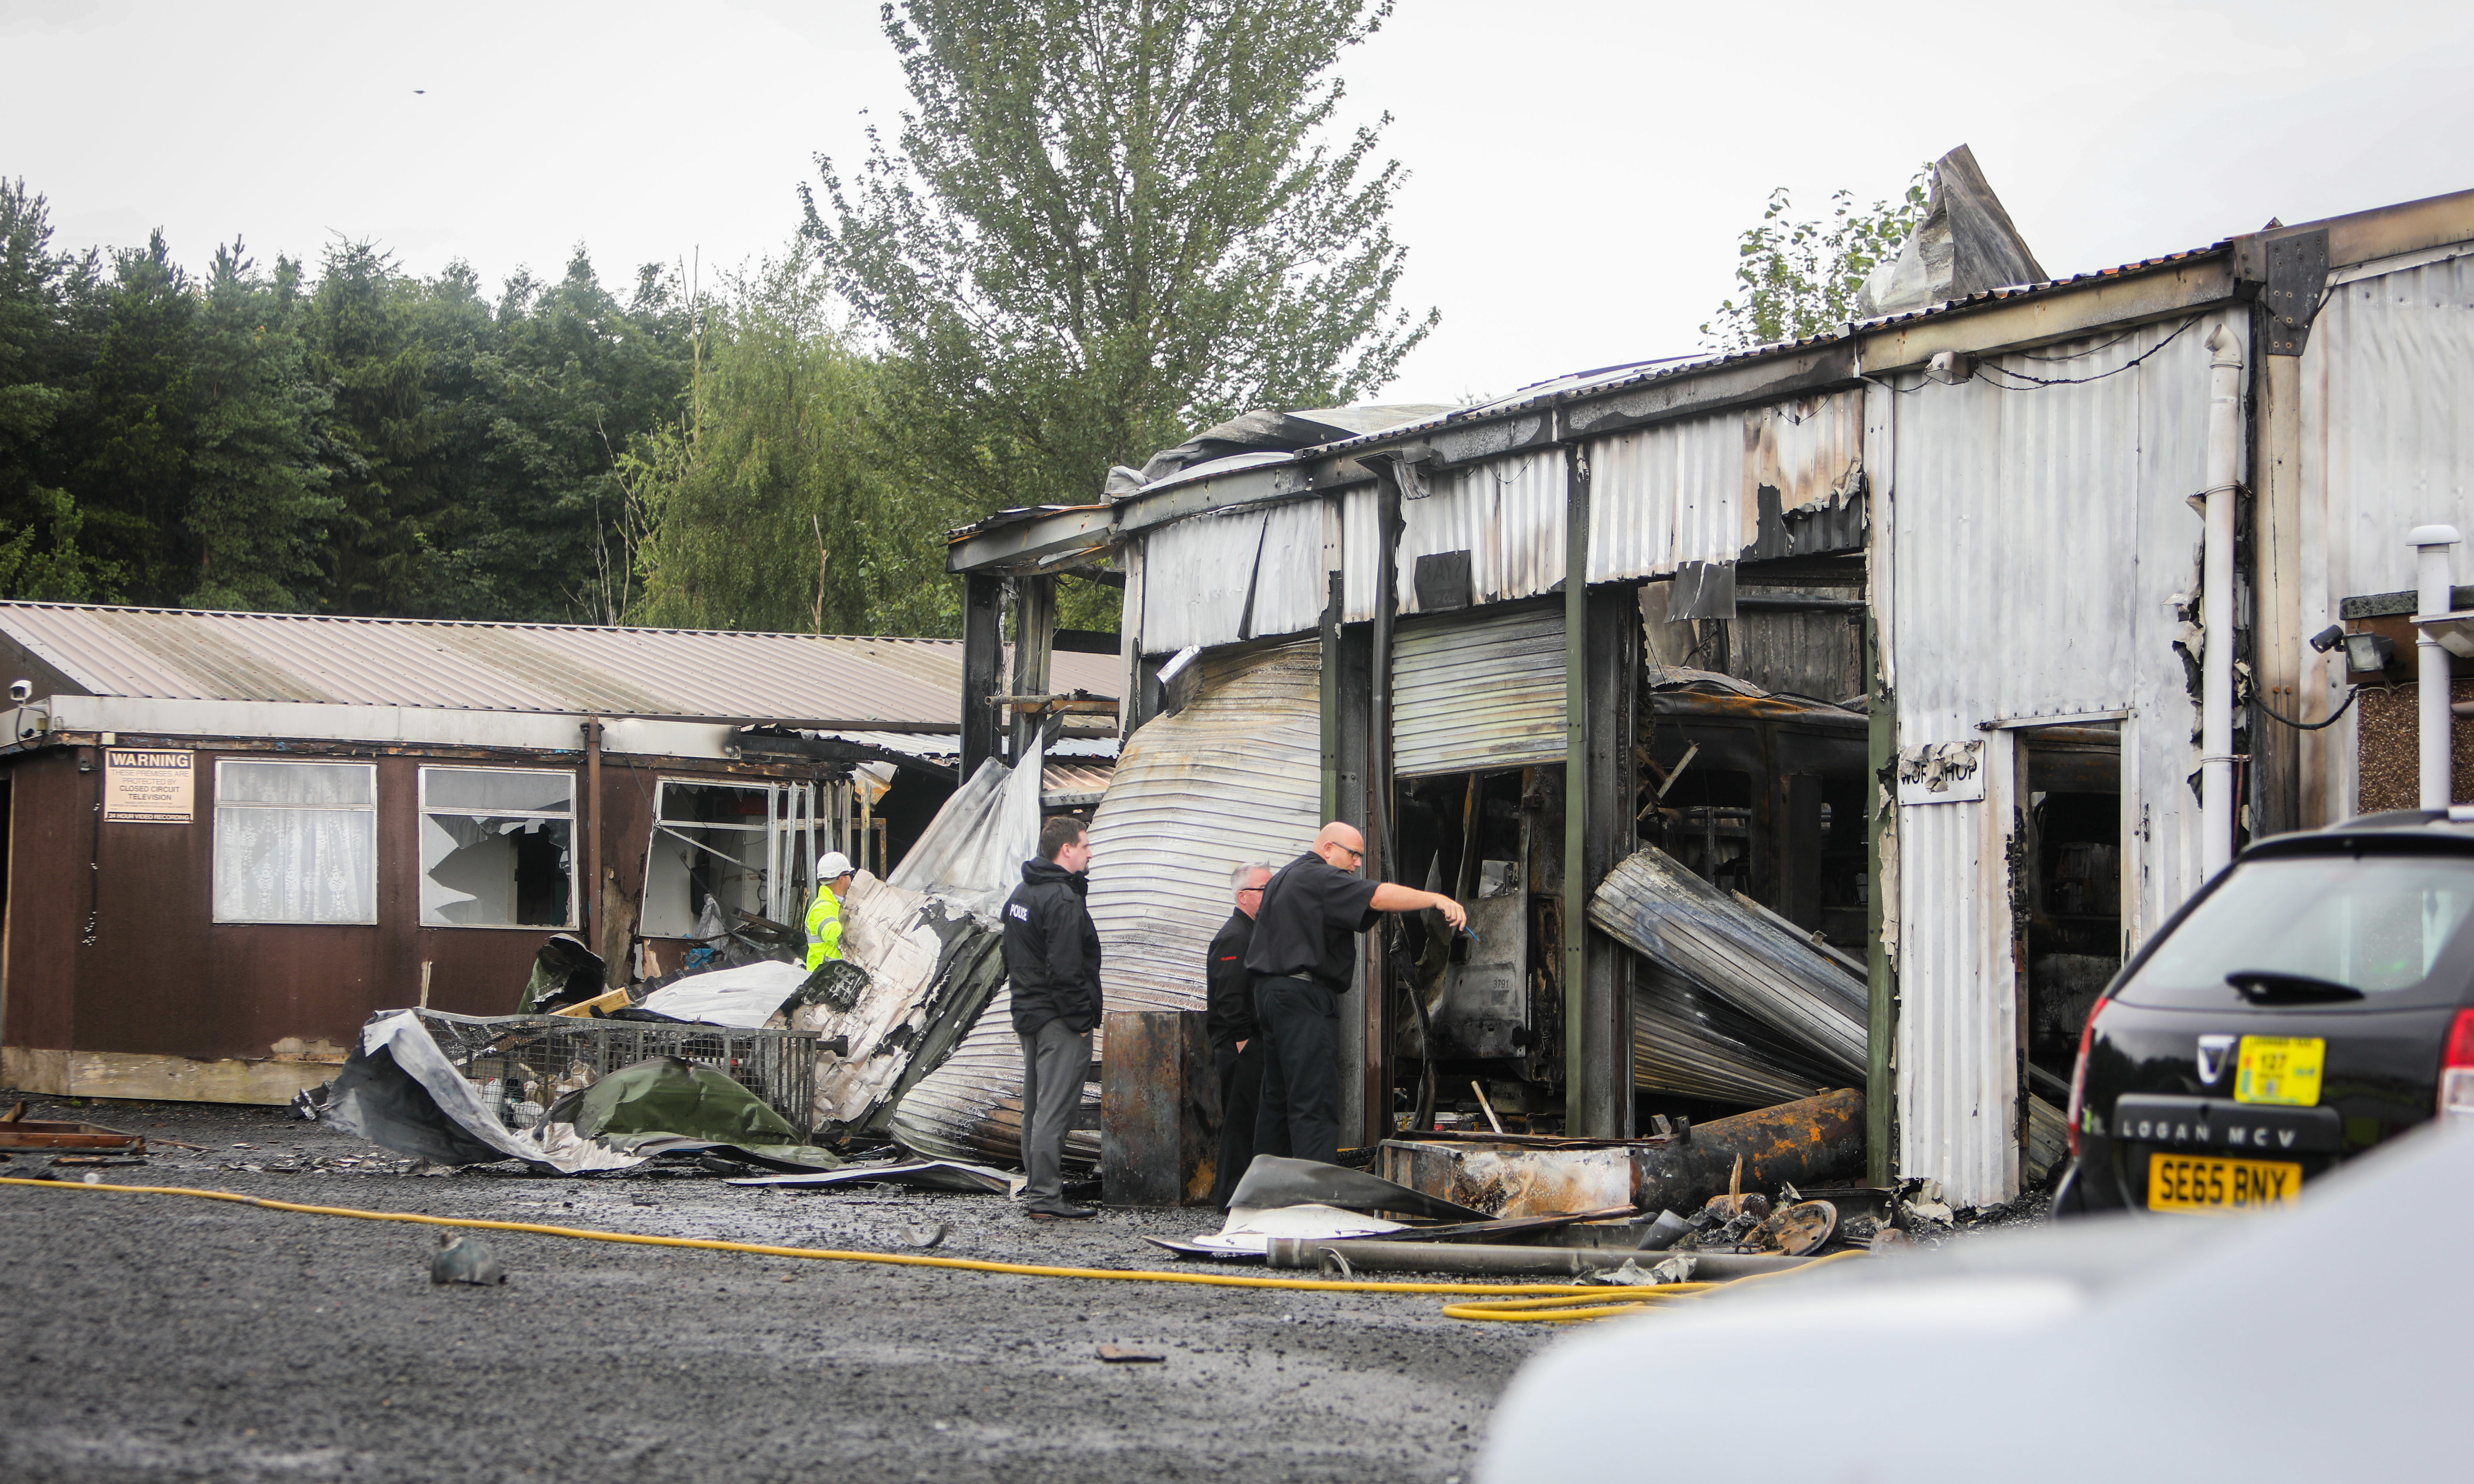 Damage following the explosion at the Cowdenbeath taxi firm.